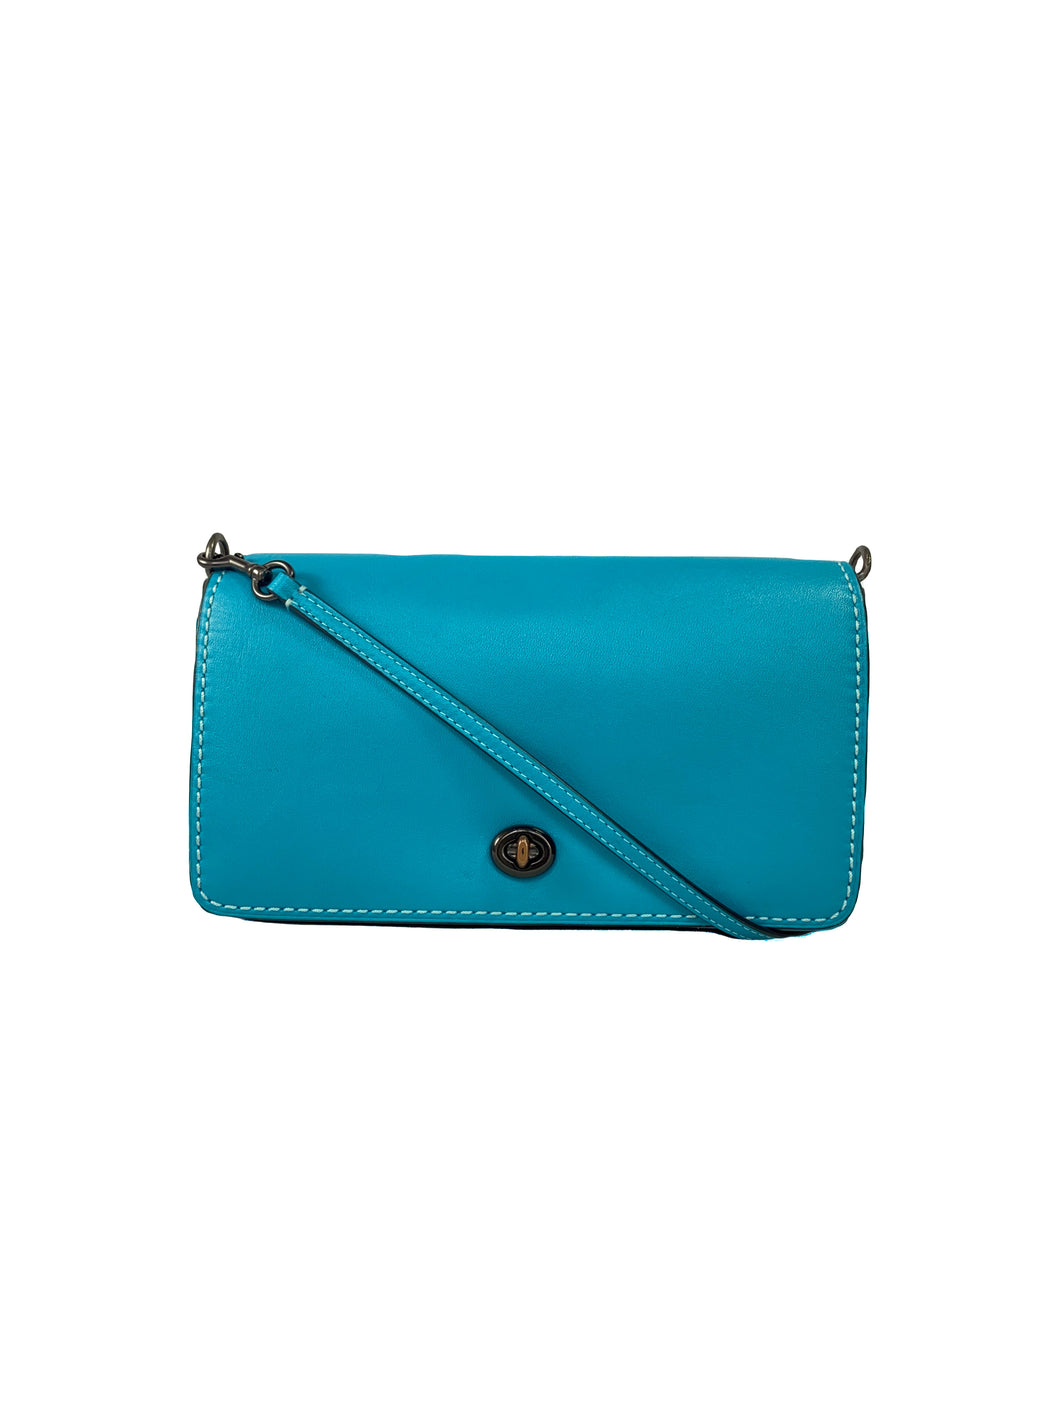 Coach bright blue leather re-issue Dinky